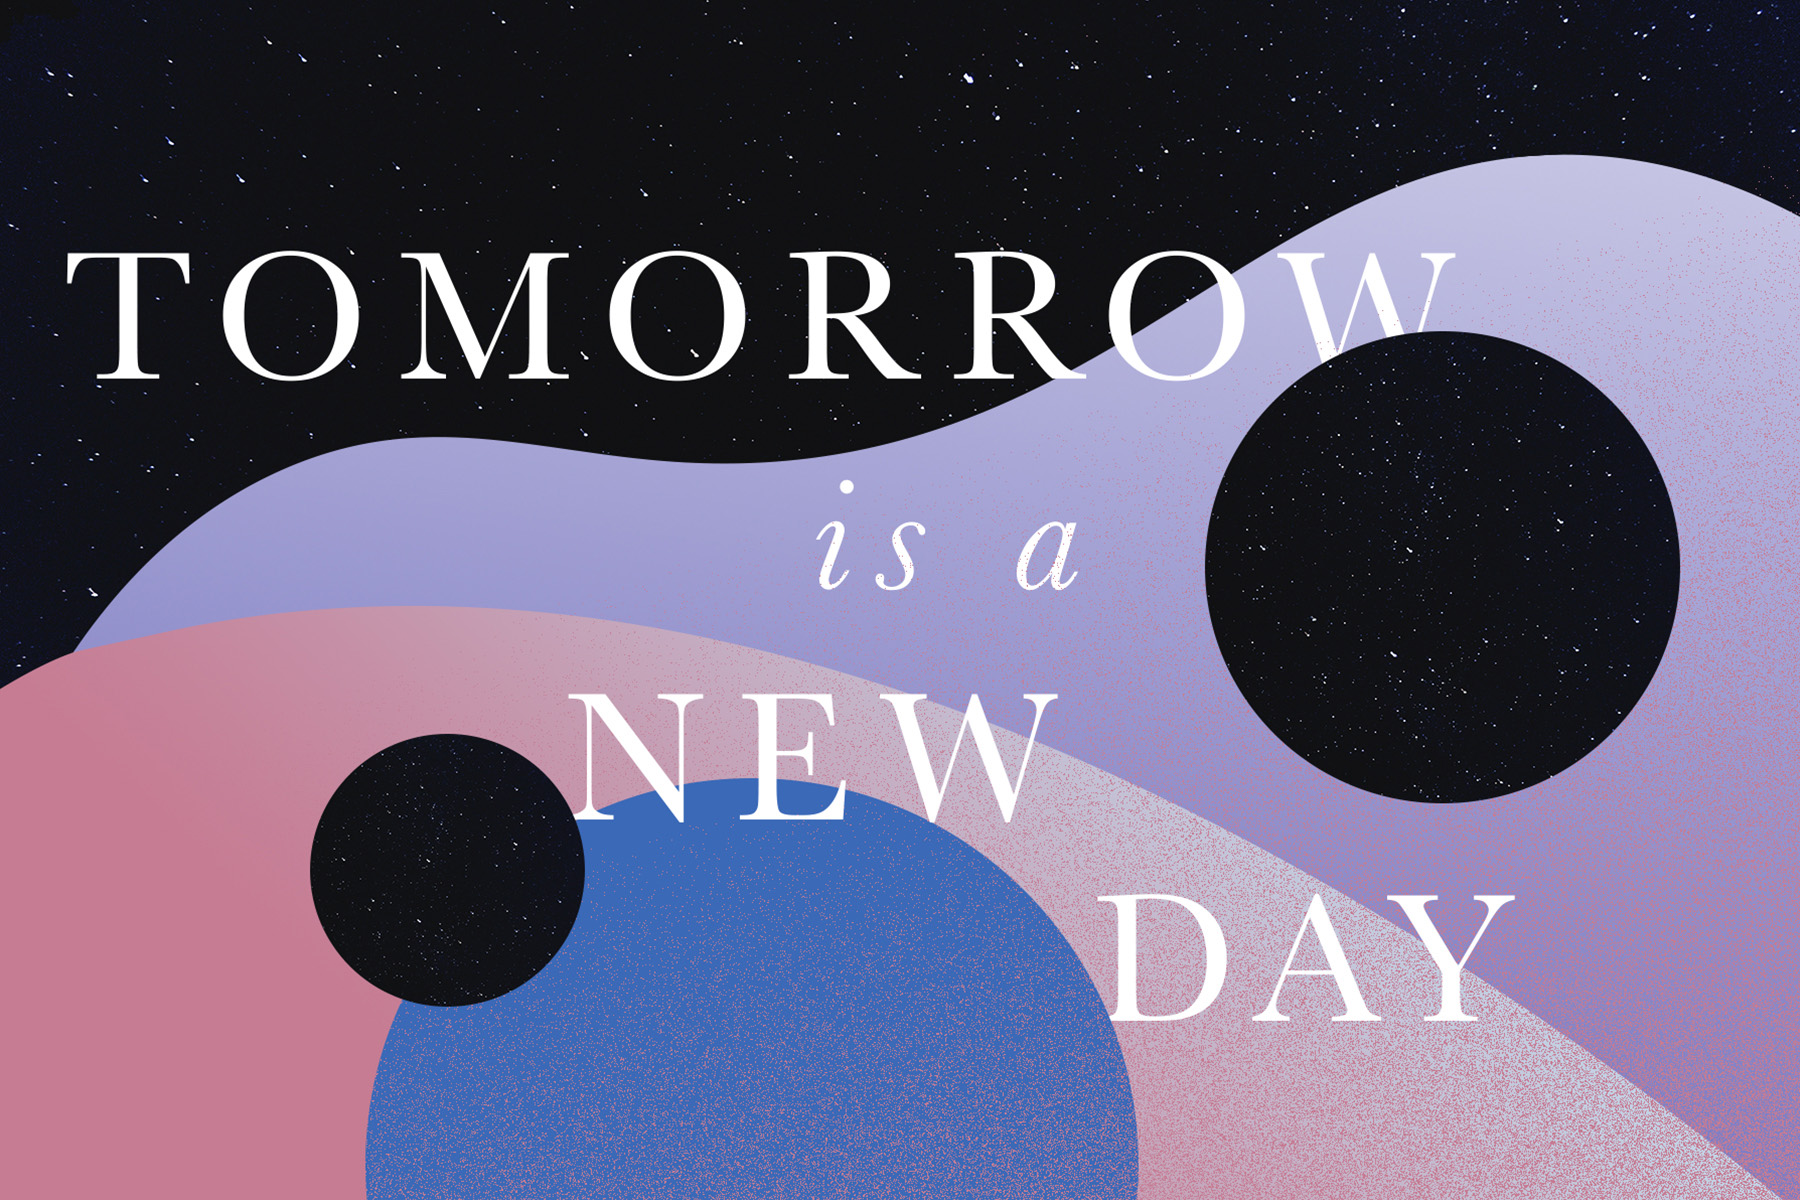 The words 'tomorrow is a new day' written in white on a black, pink and mauve backgound